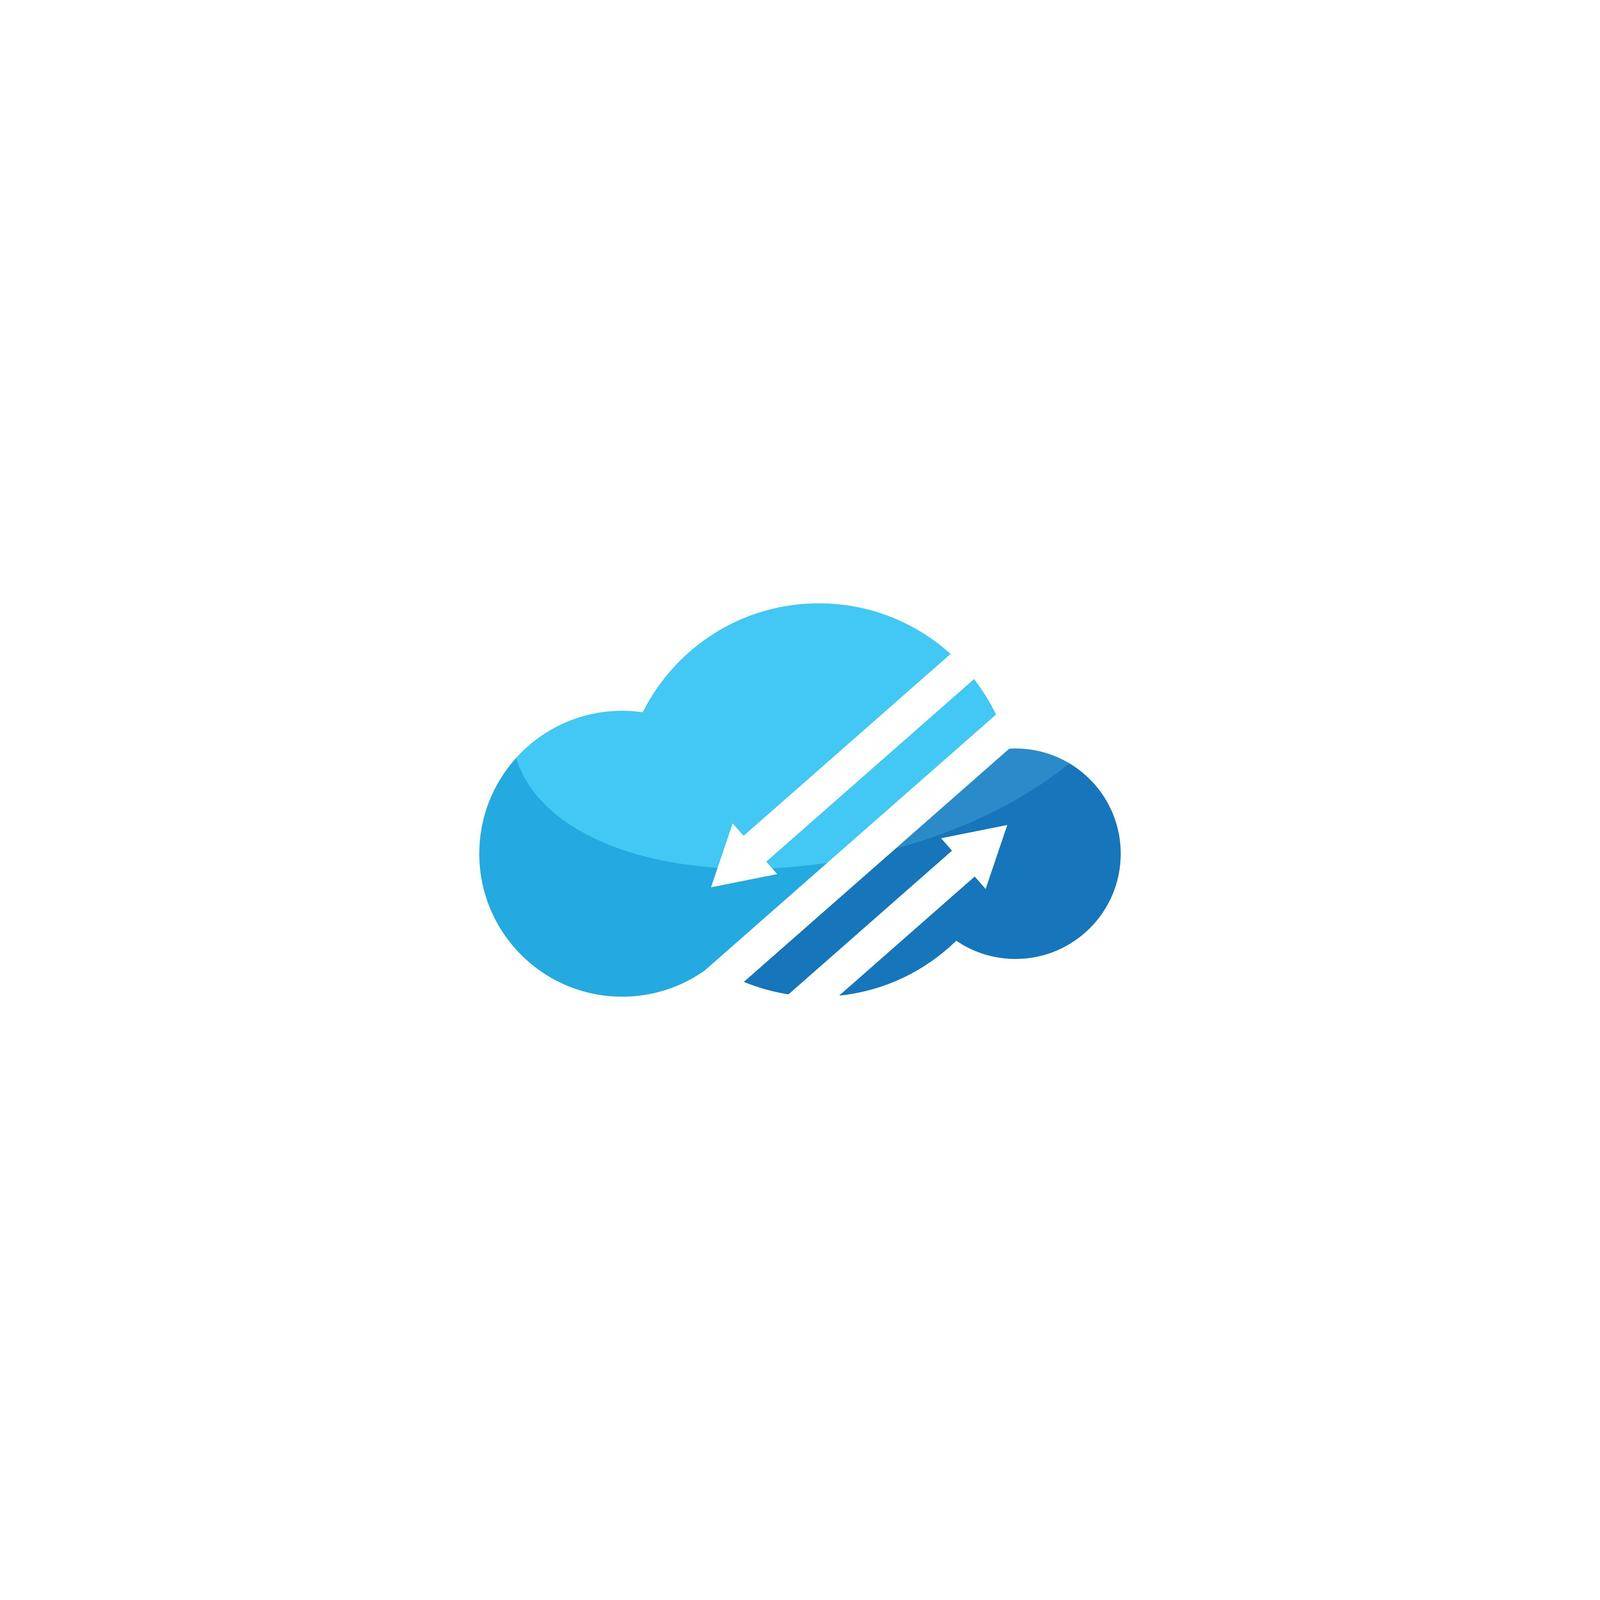 Cloud illustration vector by awk